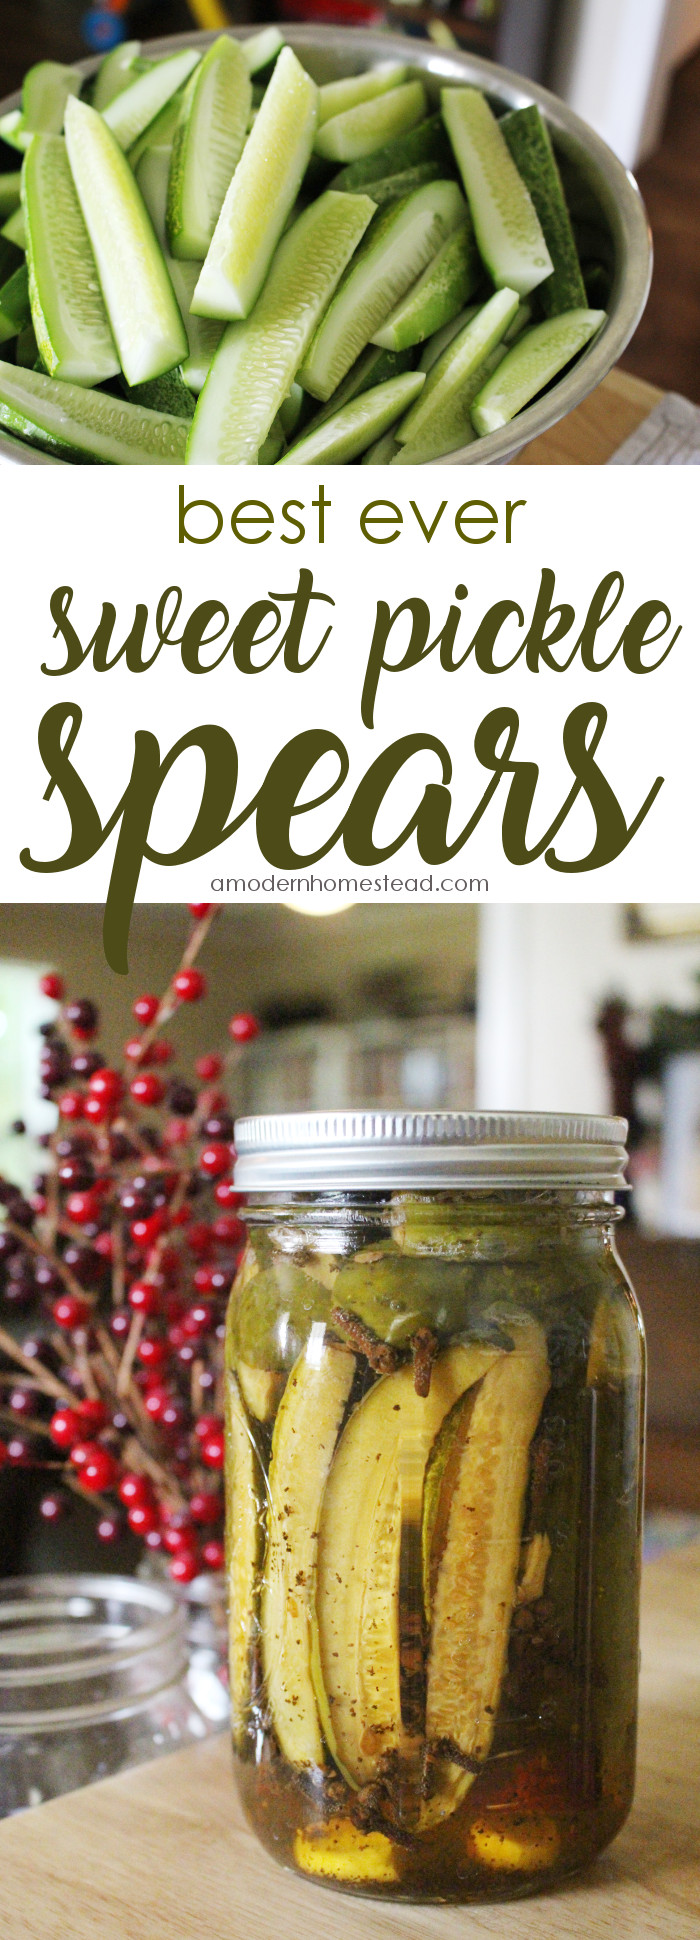 Sweet Pickles Recipe For Canning
 The Best Sweet Pickle Recipe